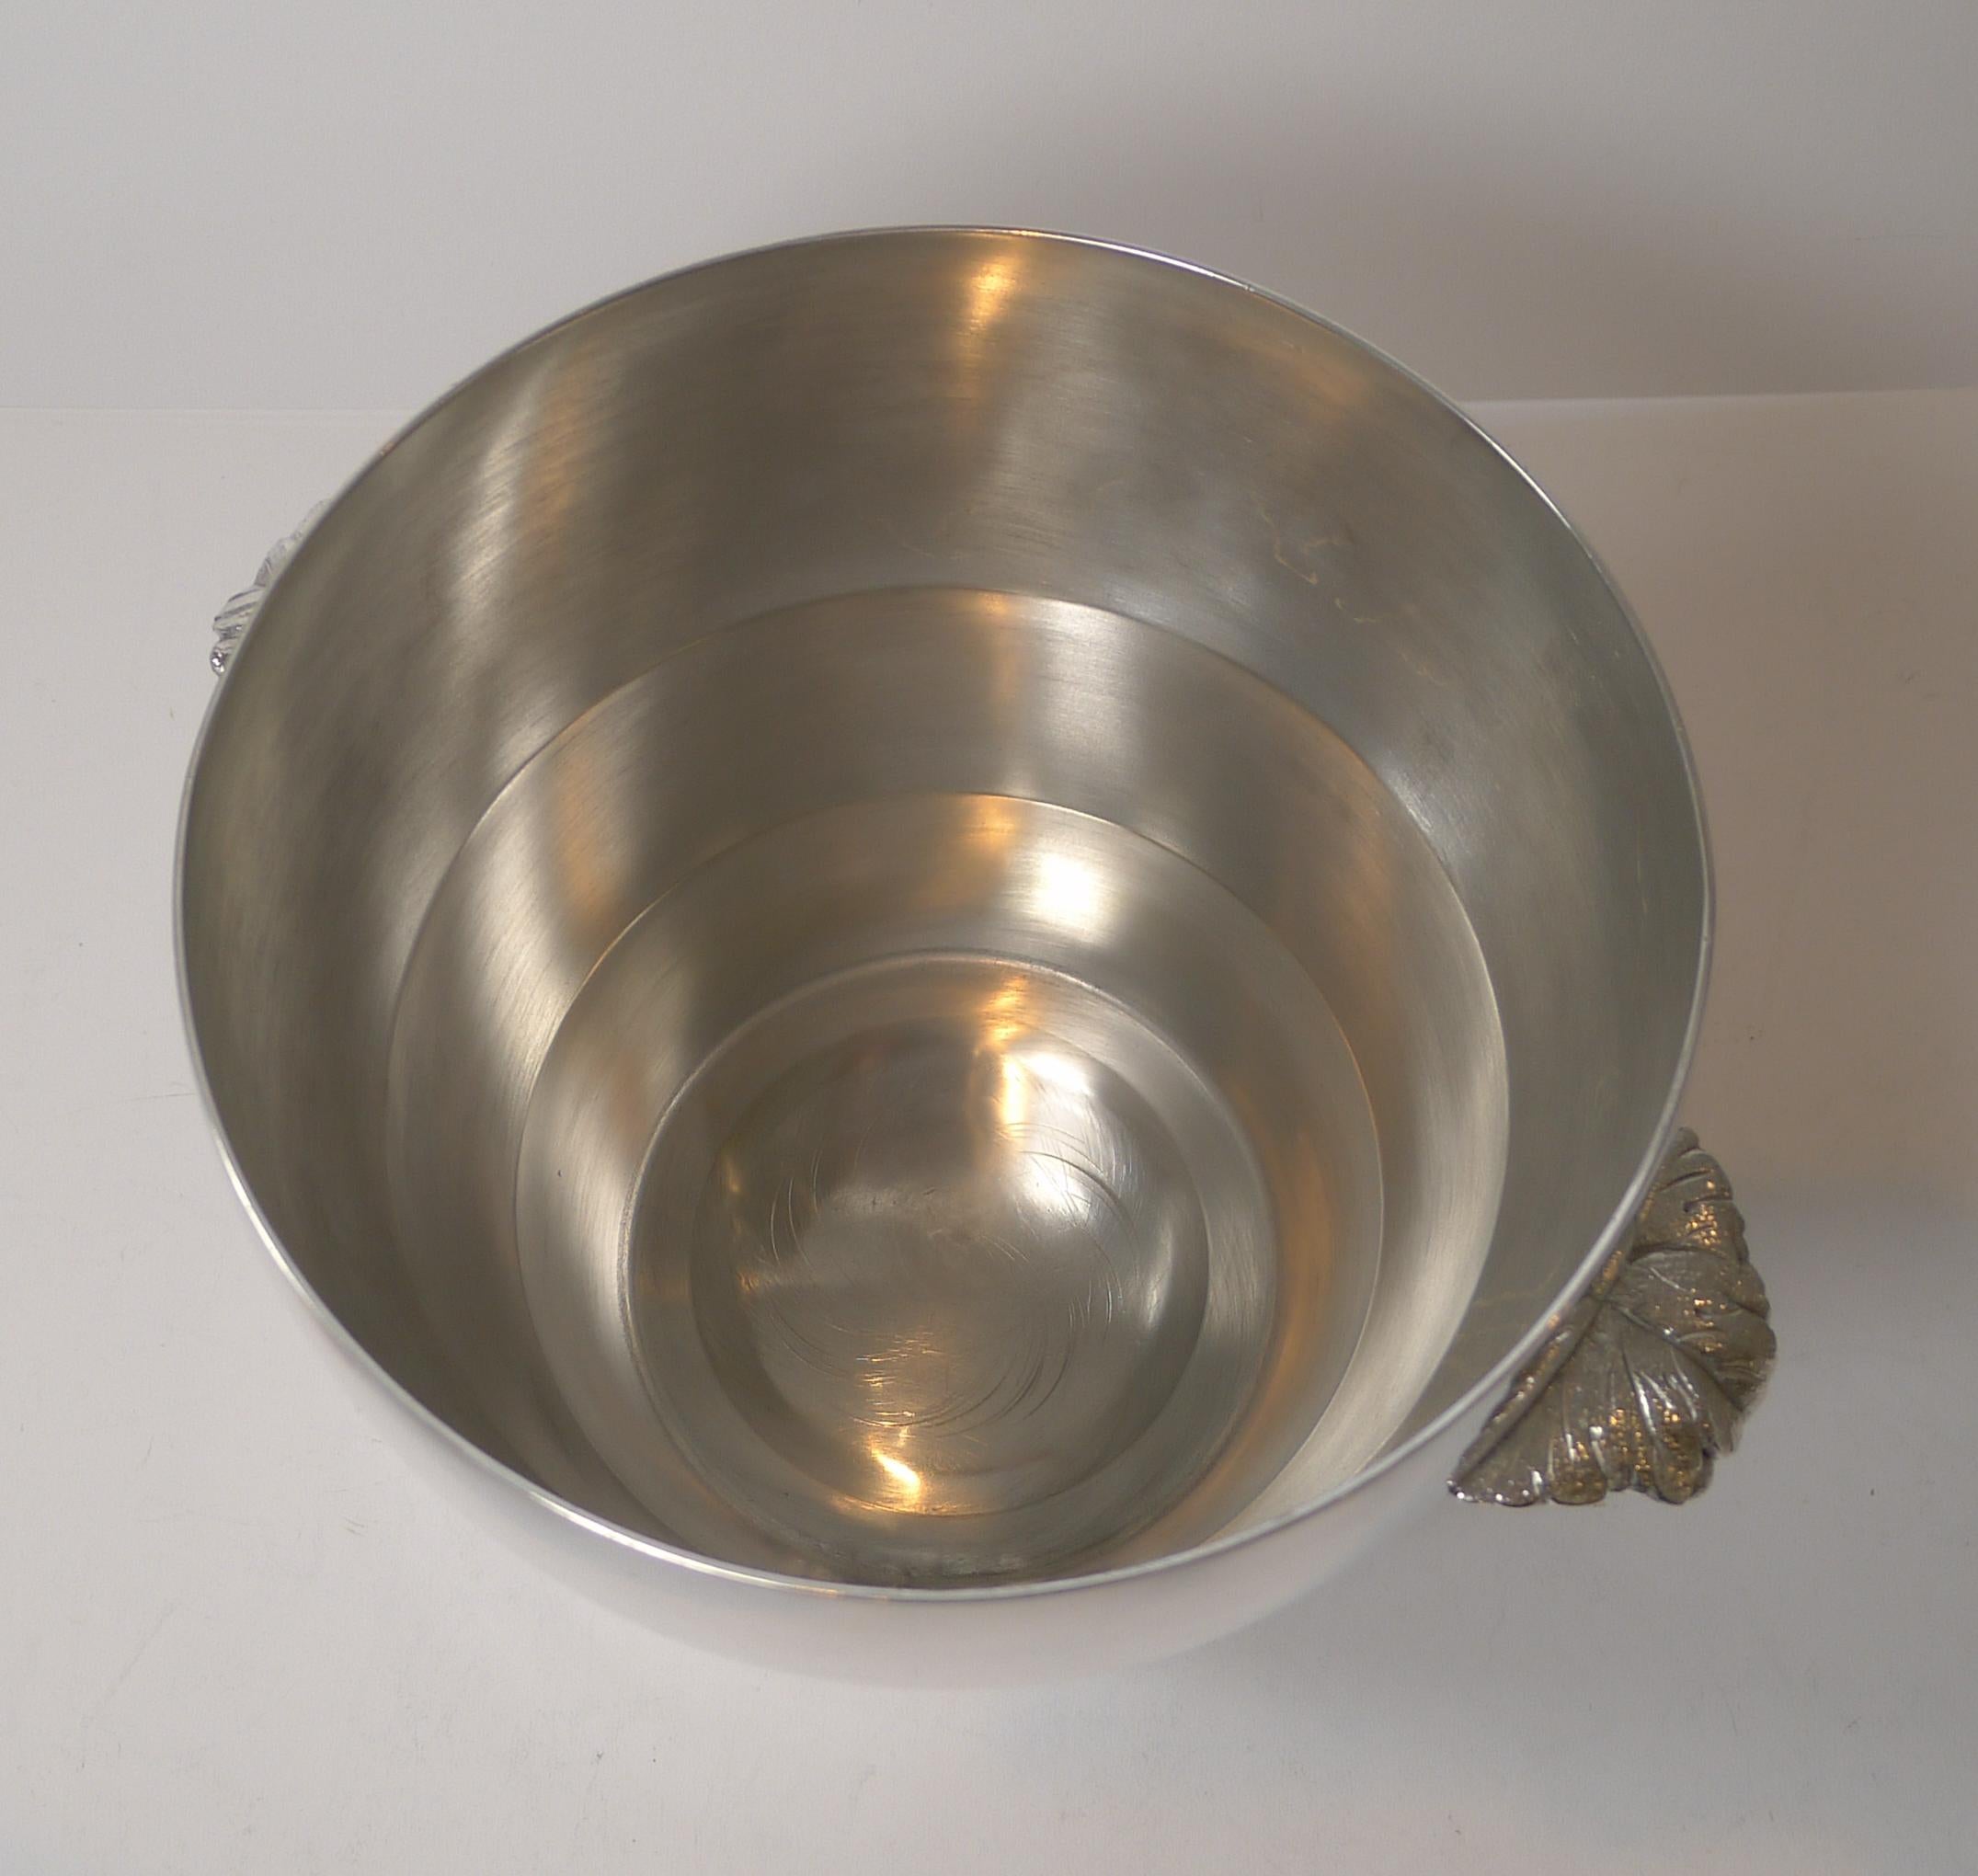 Art Deco French Silver Plated Champagne Bucket / Wine Cooler c. 1930 In Good Condition For Sale In Bath, GB